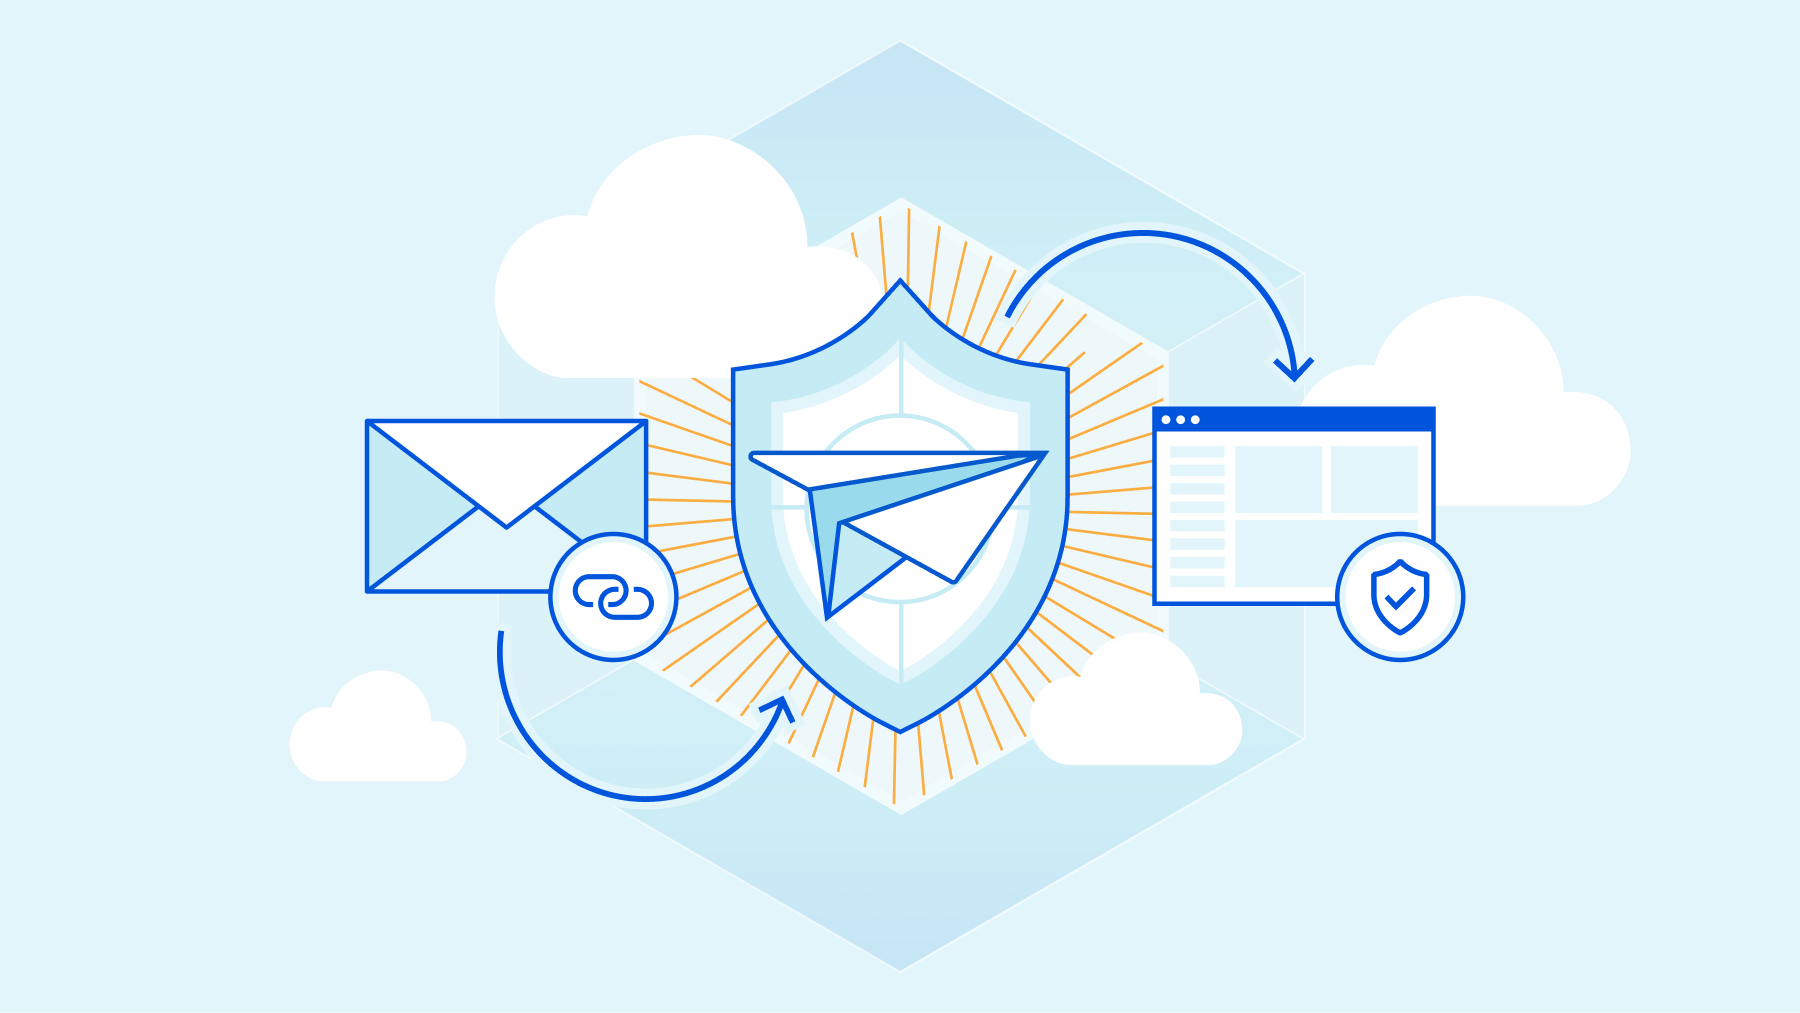 Illustration of links going through emails and staying protected